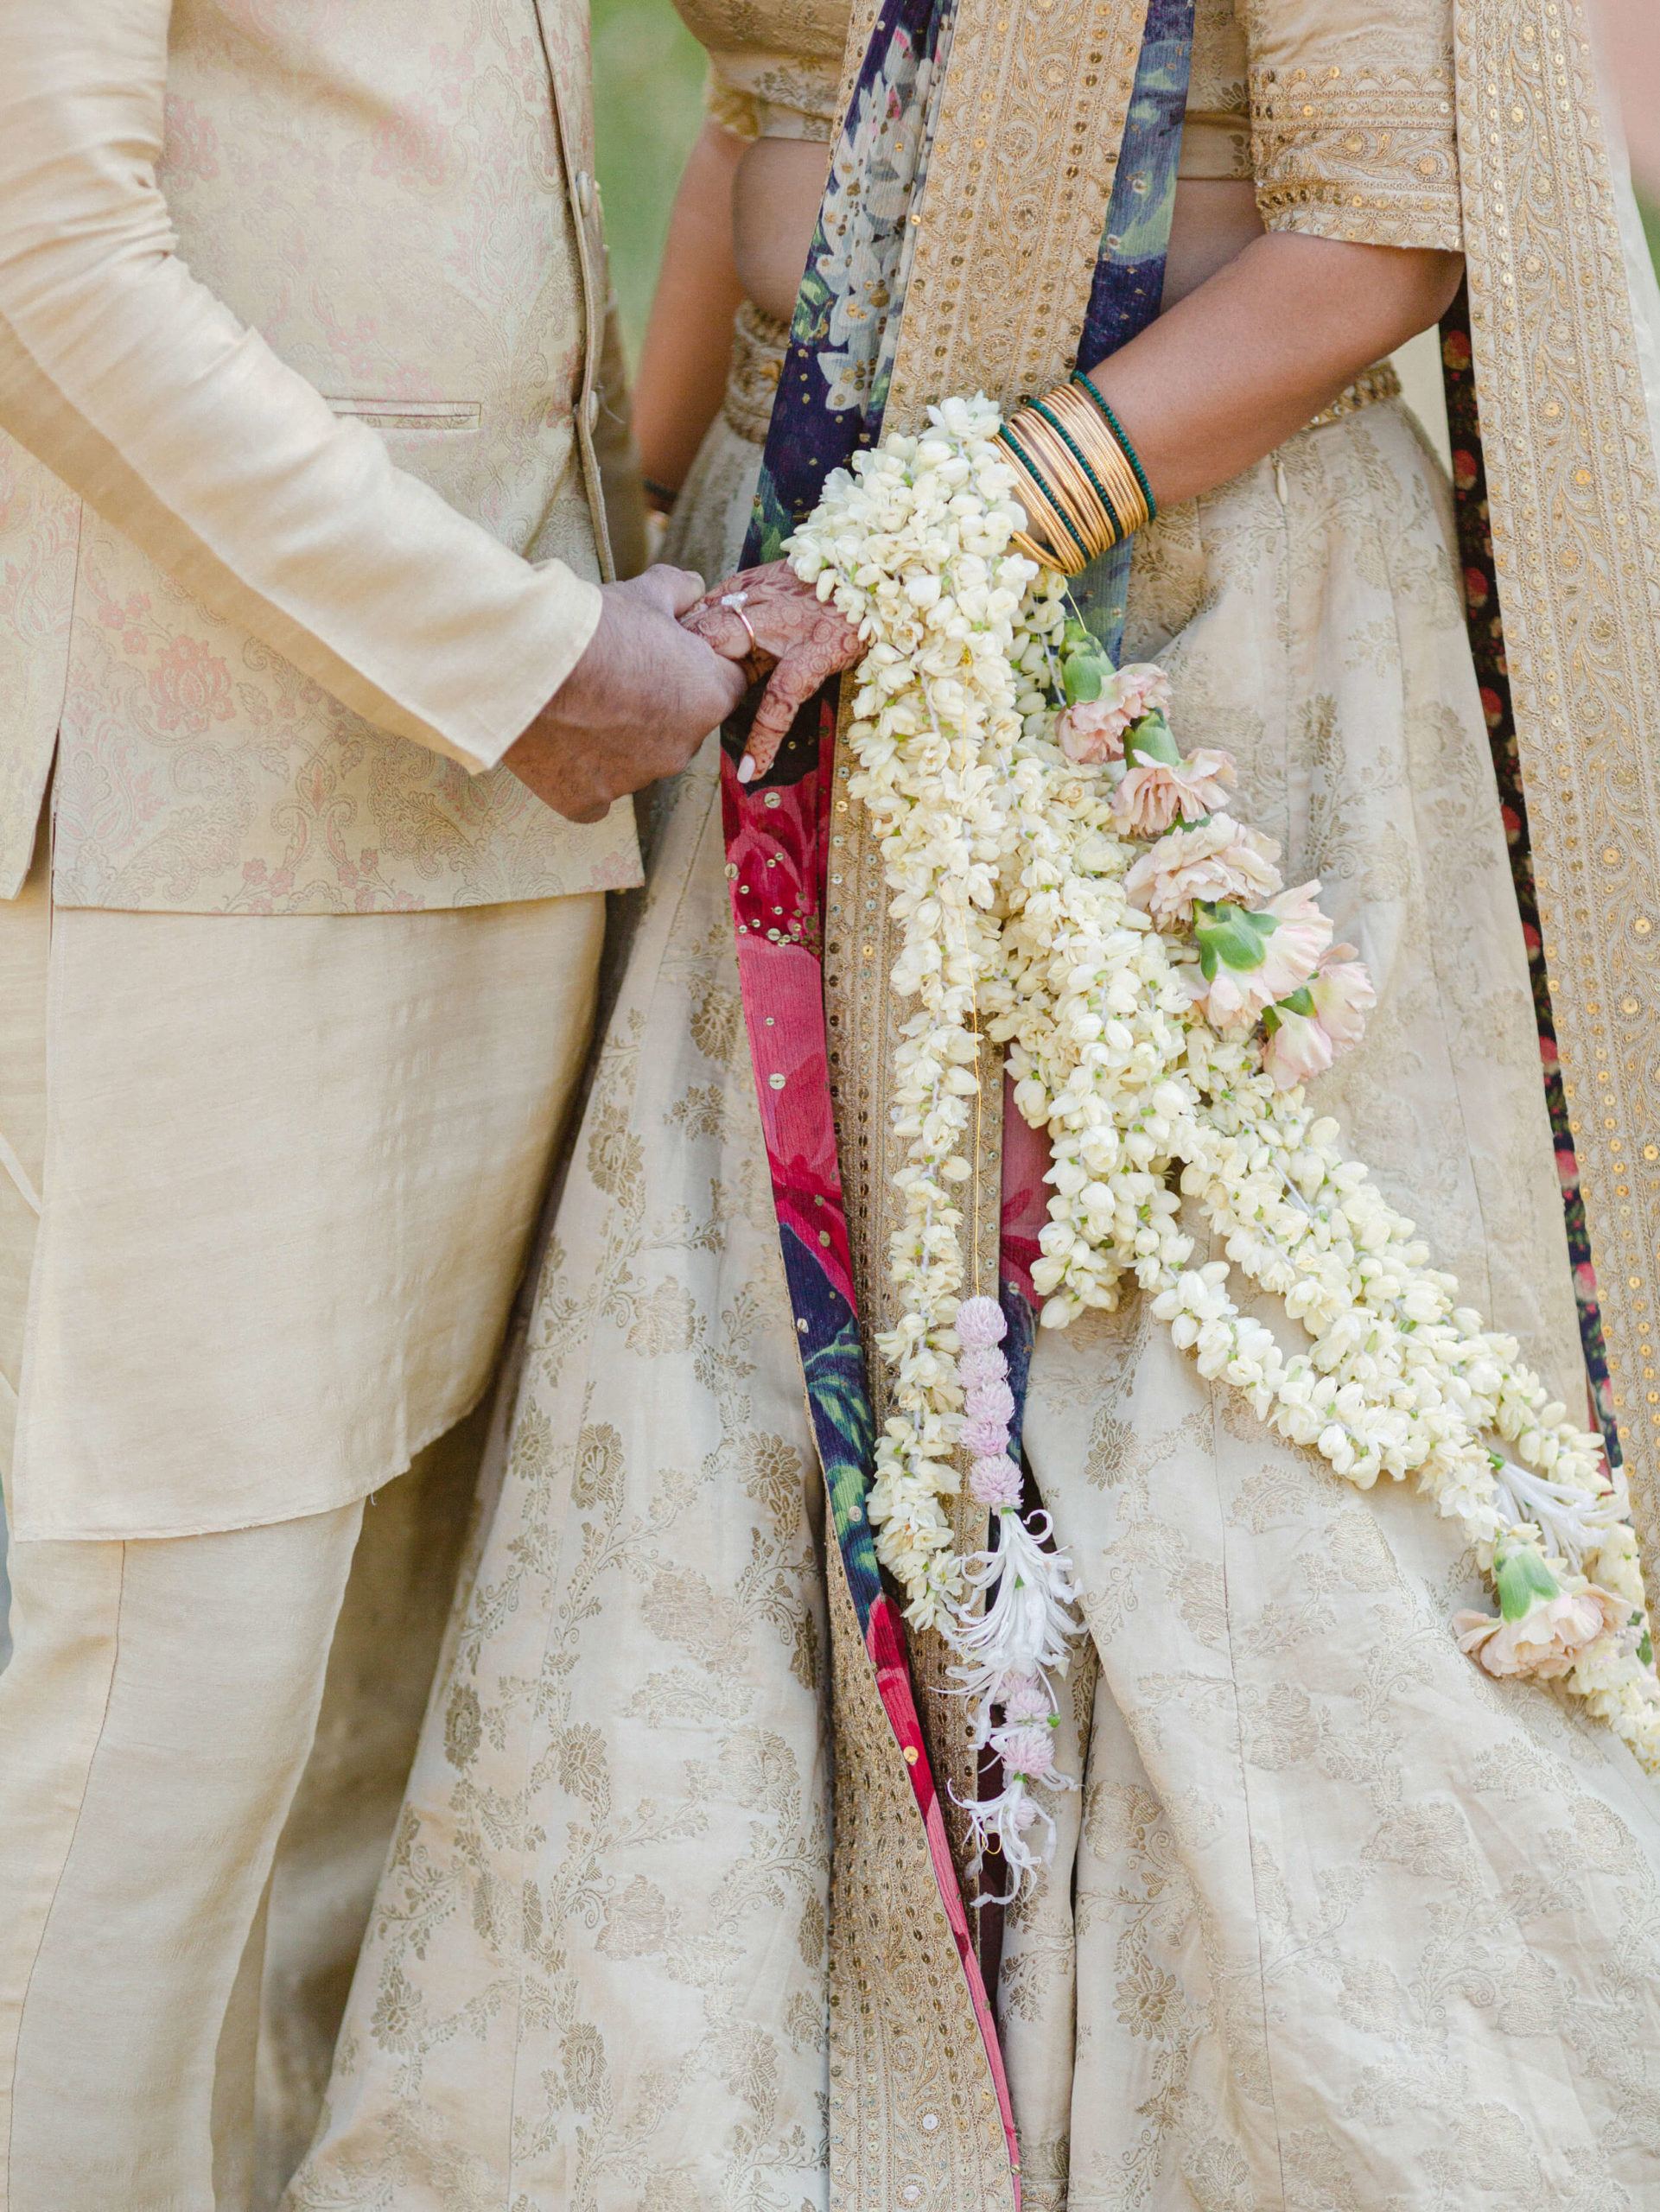 Sapna and Ari holding hands in their Indian wedding atire